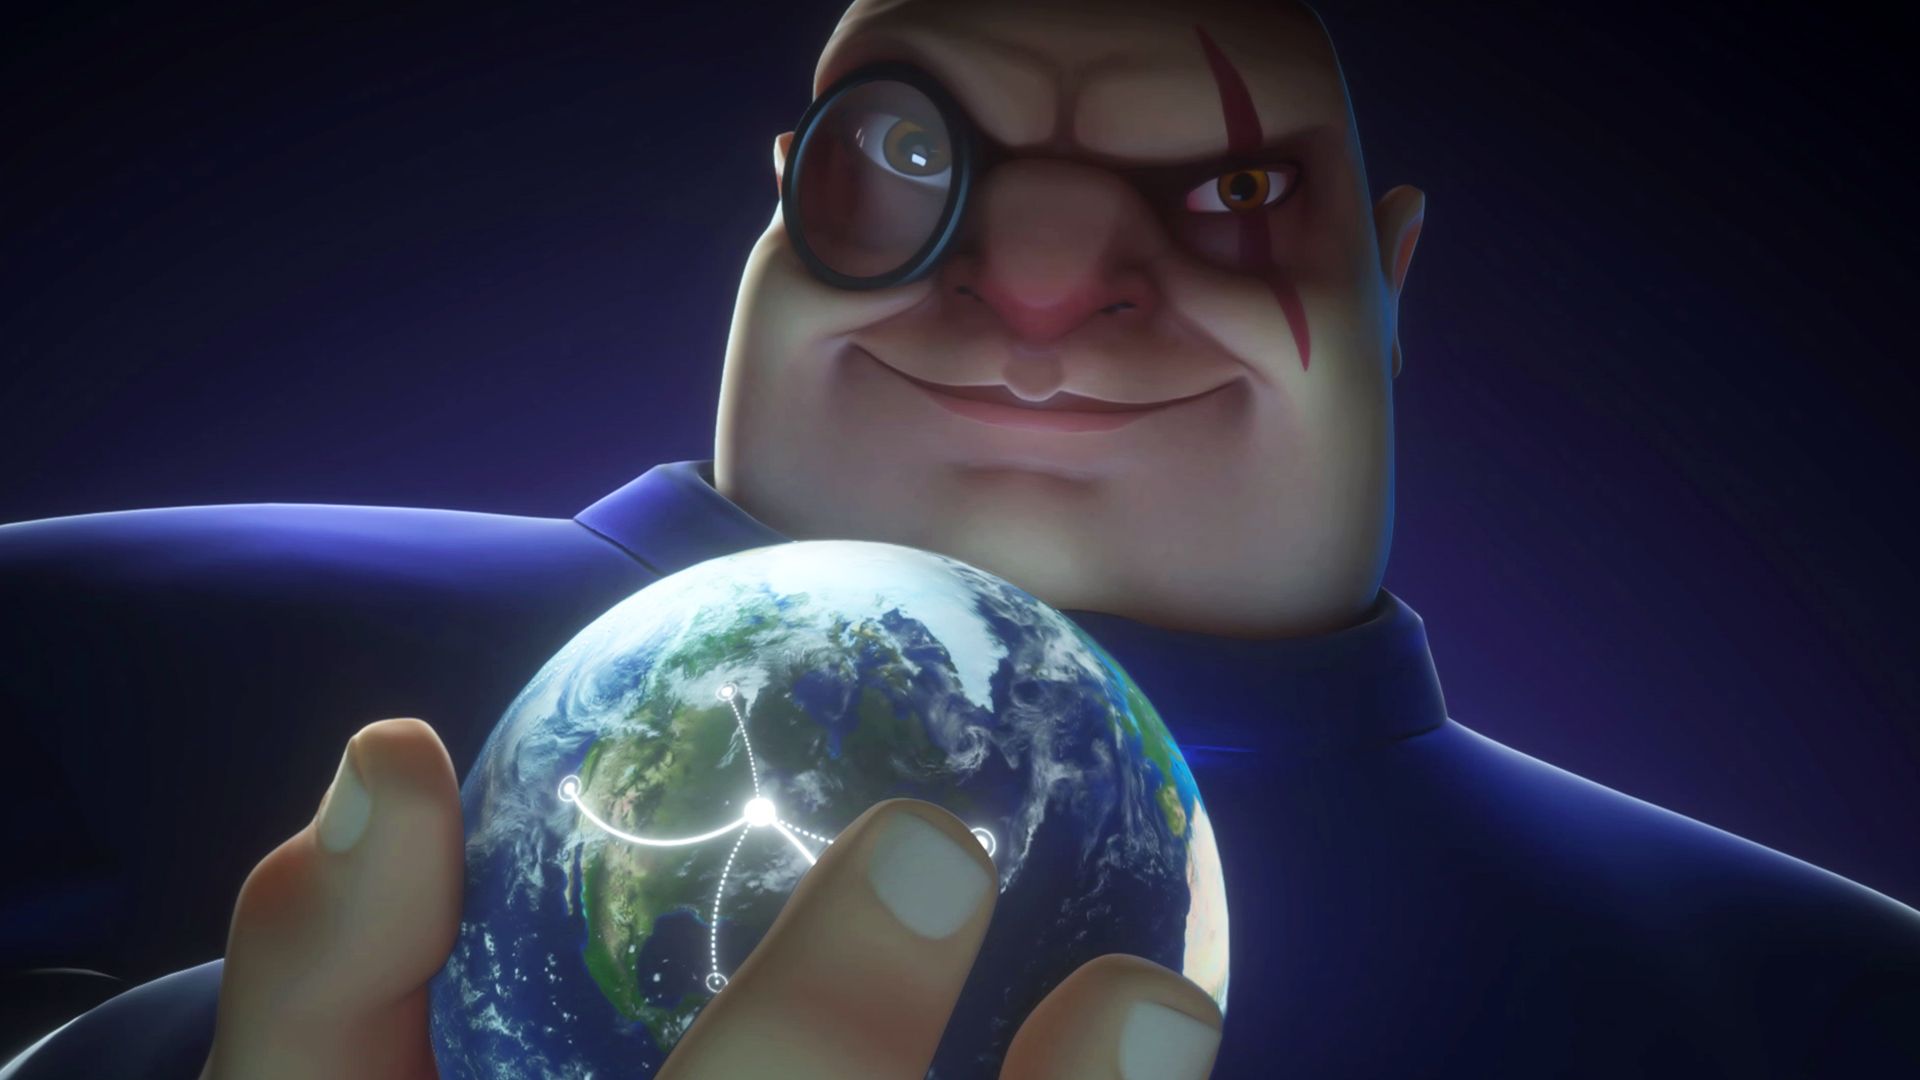 Image for Evil Genius 2 wants to feed the sharks, not jump them